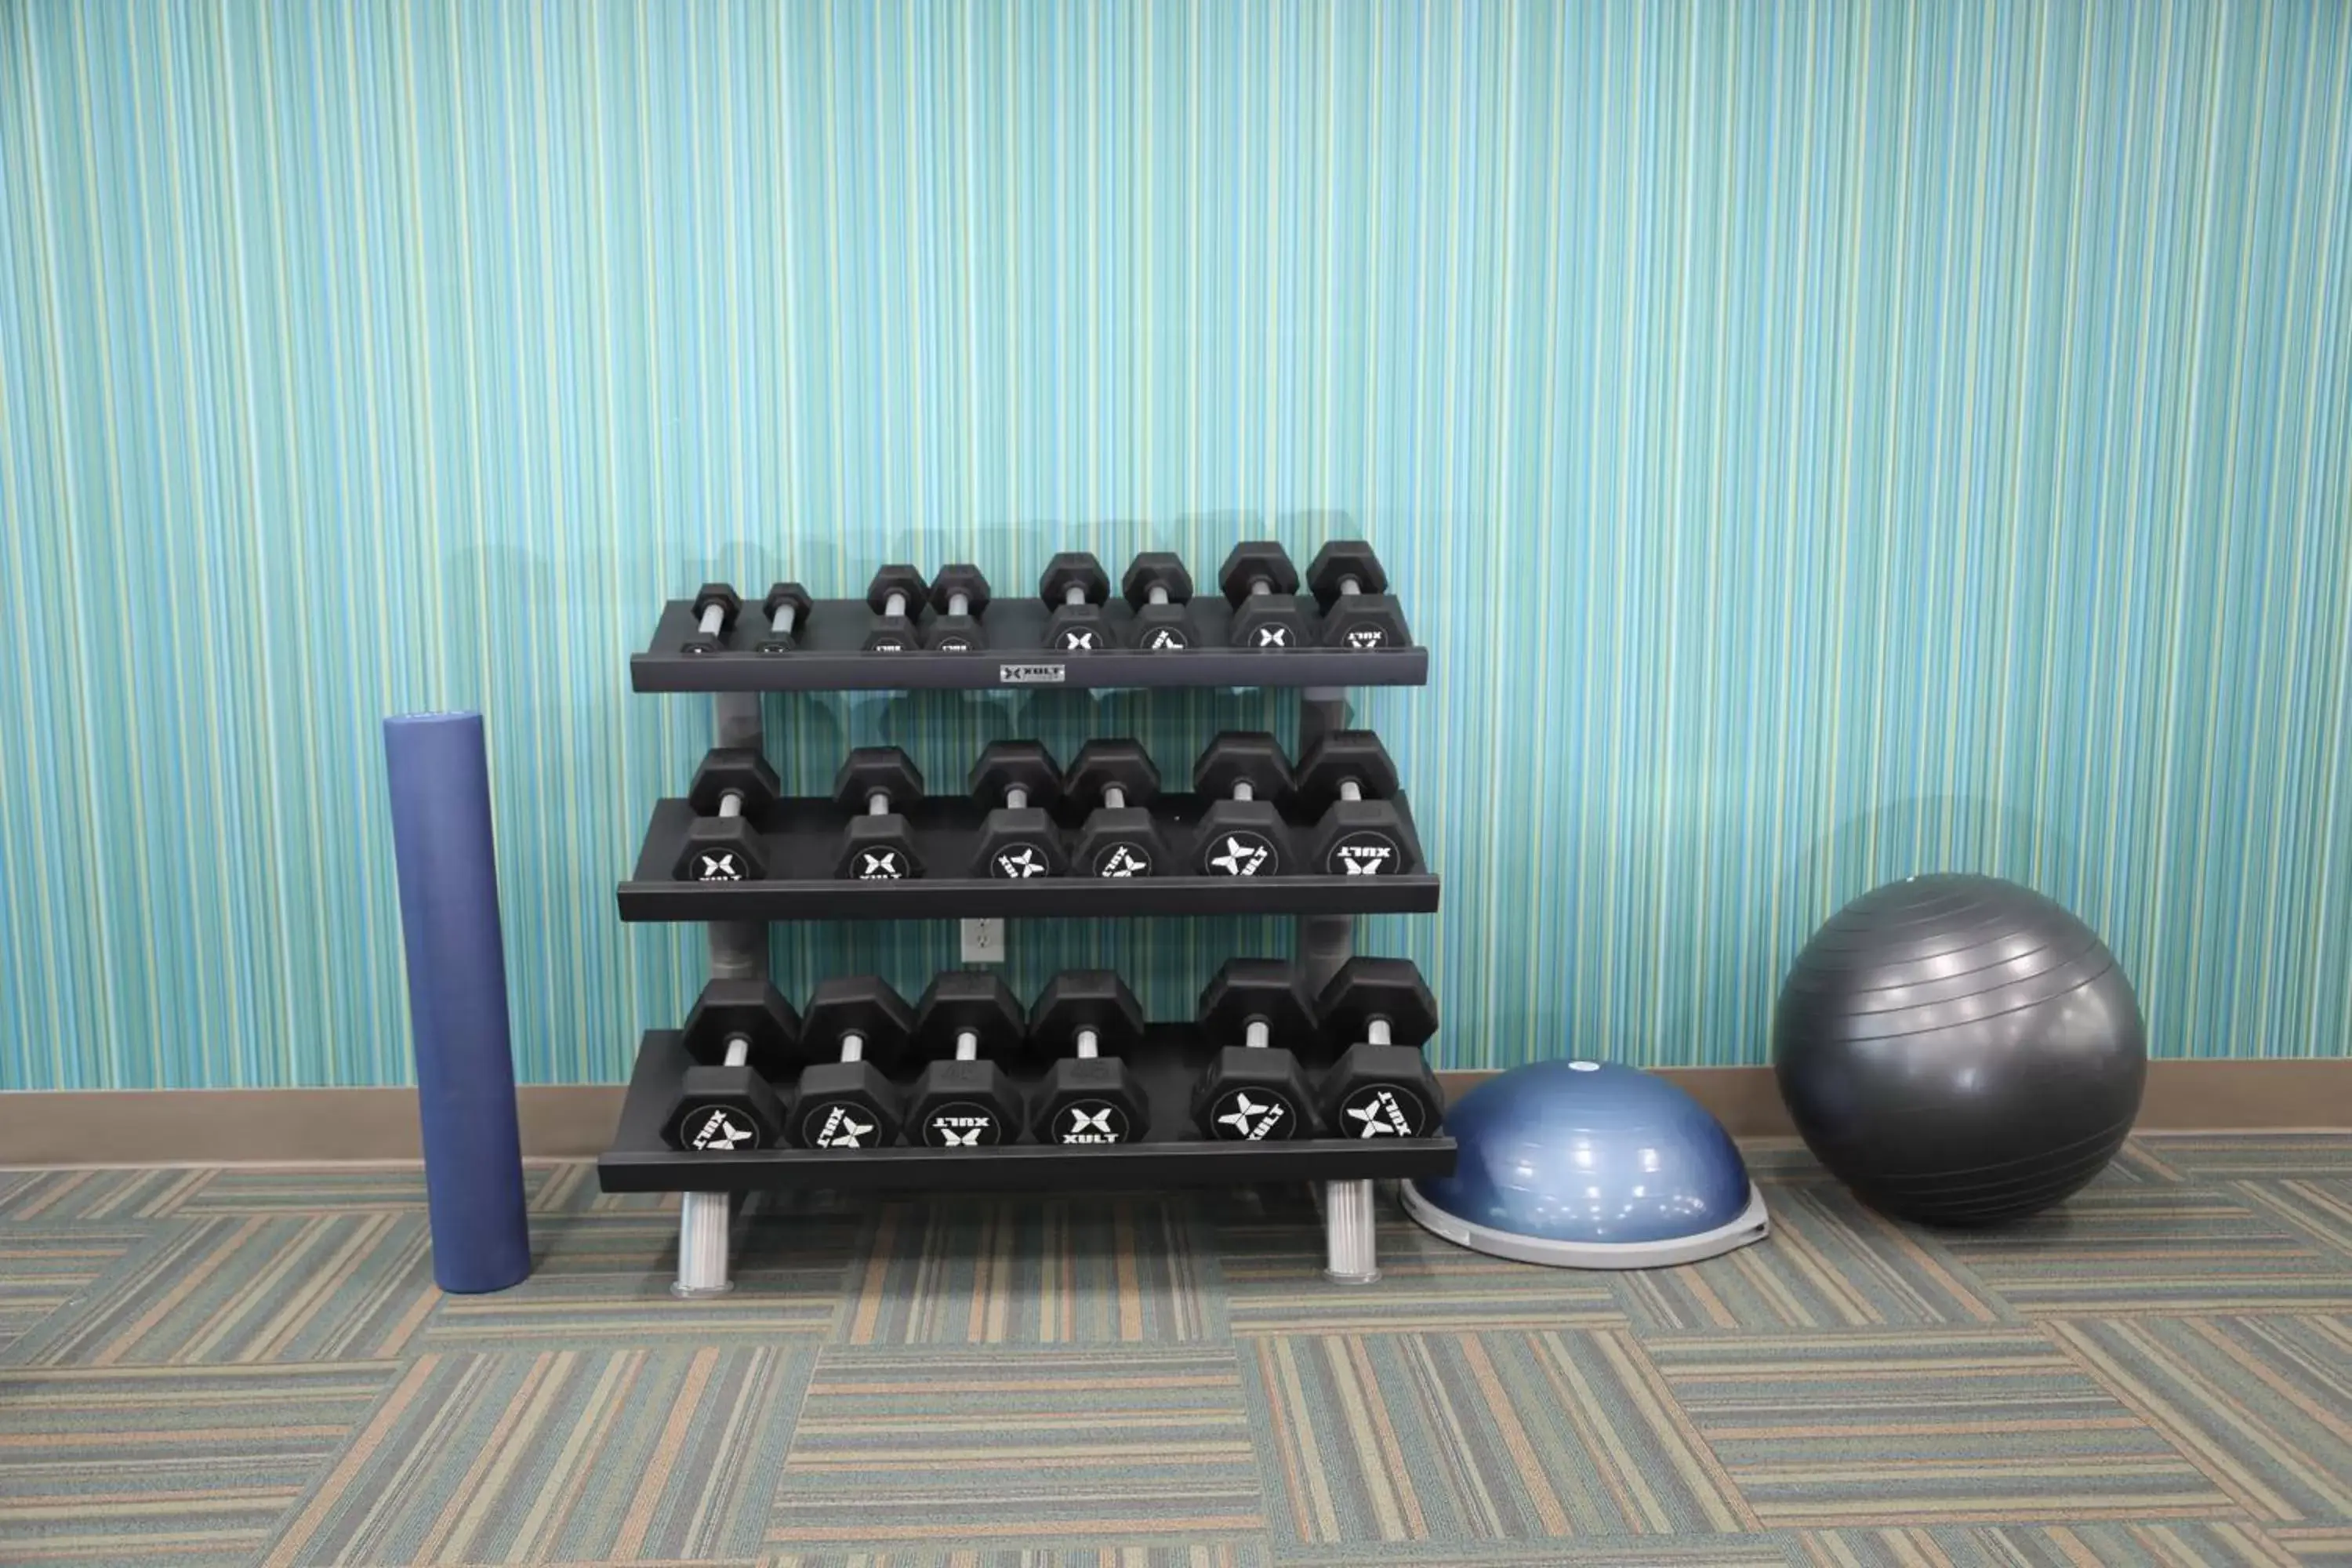 Fitness centre/facilities, Fitness Center/Facilities in Holiday Inn Express & Suites - Wylie West, an IHG Hotel